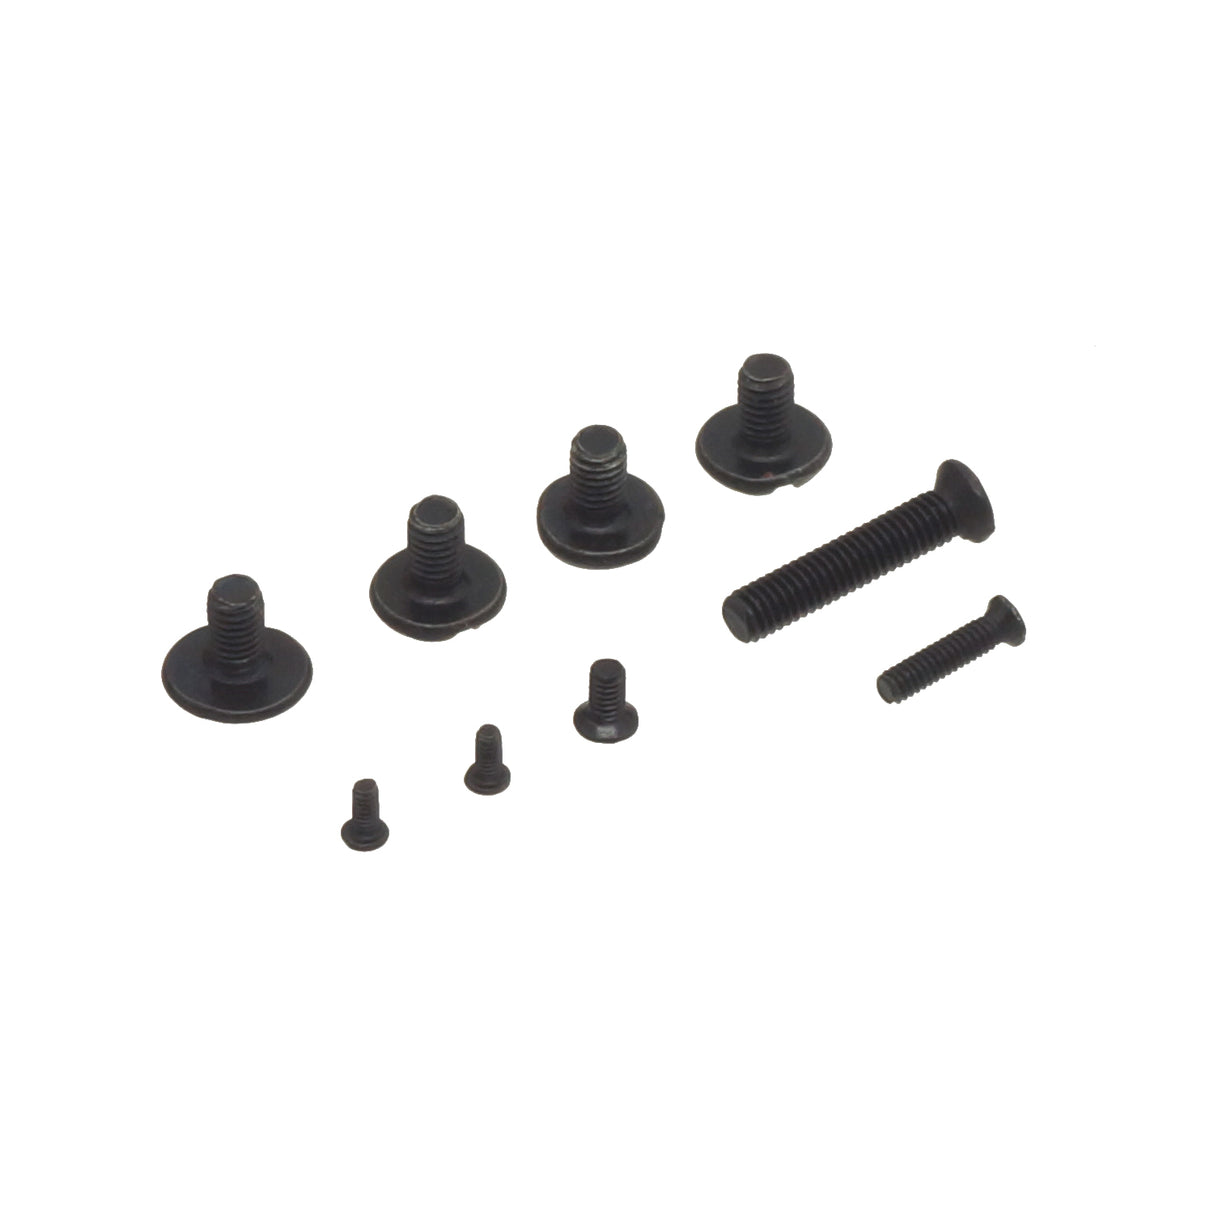 Double Bell Original Replacement Screw Set for 726 M92 GBB ( M92FS-LS )